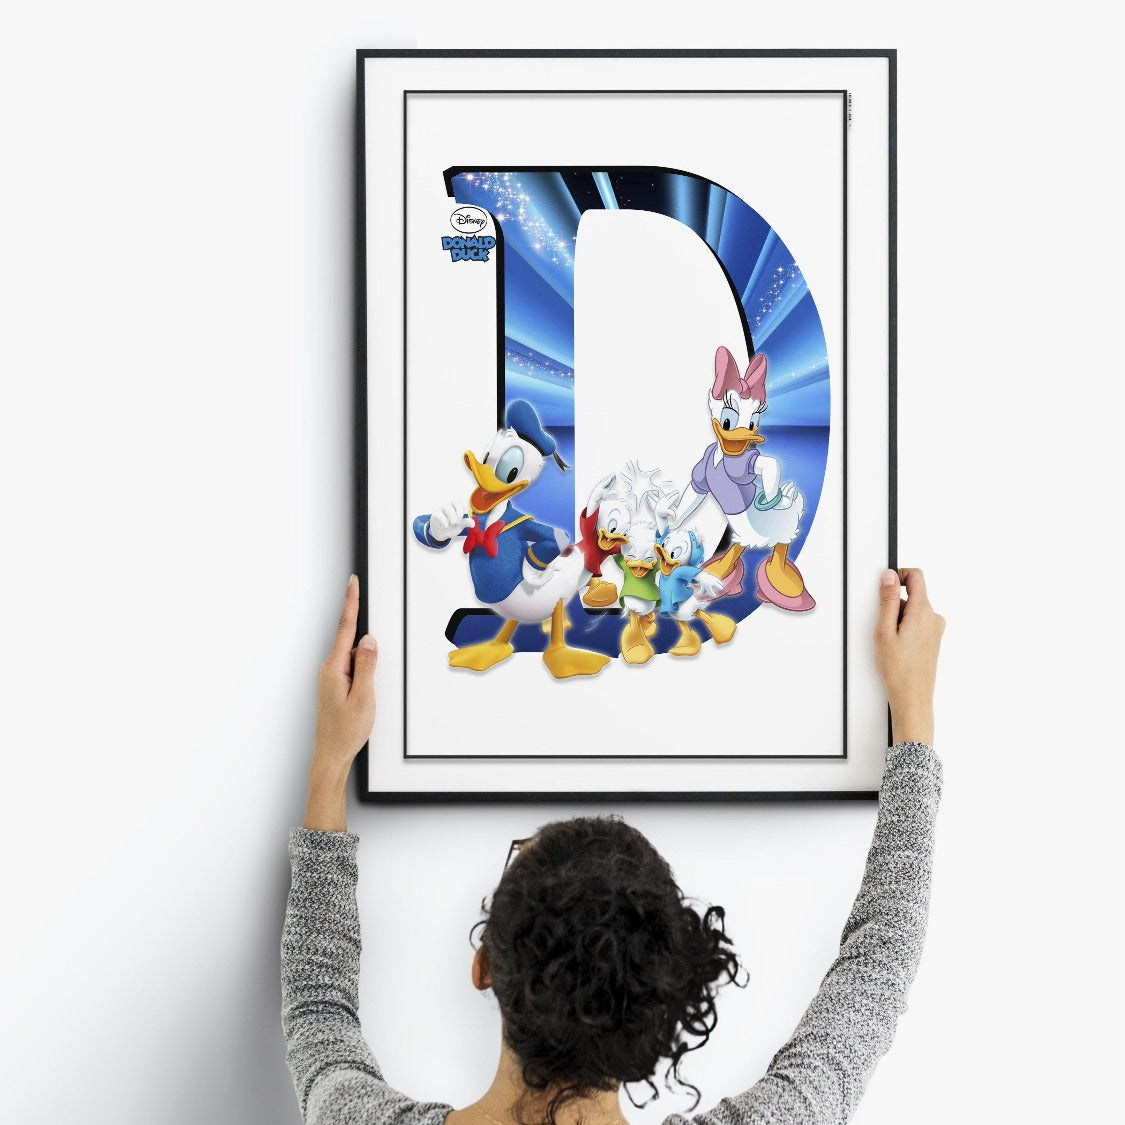 The Donald Duck Movie Poster is the perfect choice for Disney and animation fans. Featuring all of Disney's iconic characters in one place, this classic poster is ideal for any Disney World poster section. These high-quality prints can easily be personalized as wall murals or fine art prints, with the option of print-on-demand available. Enhance any room with this timeless character poster!